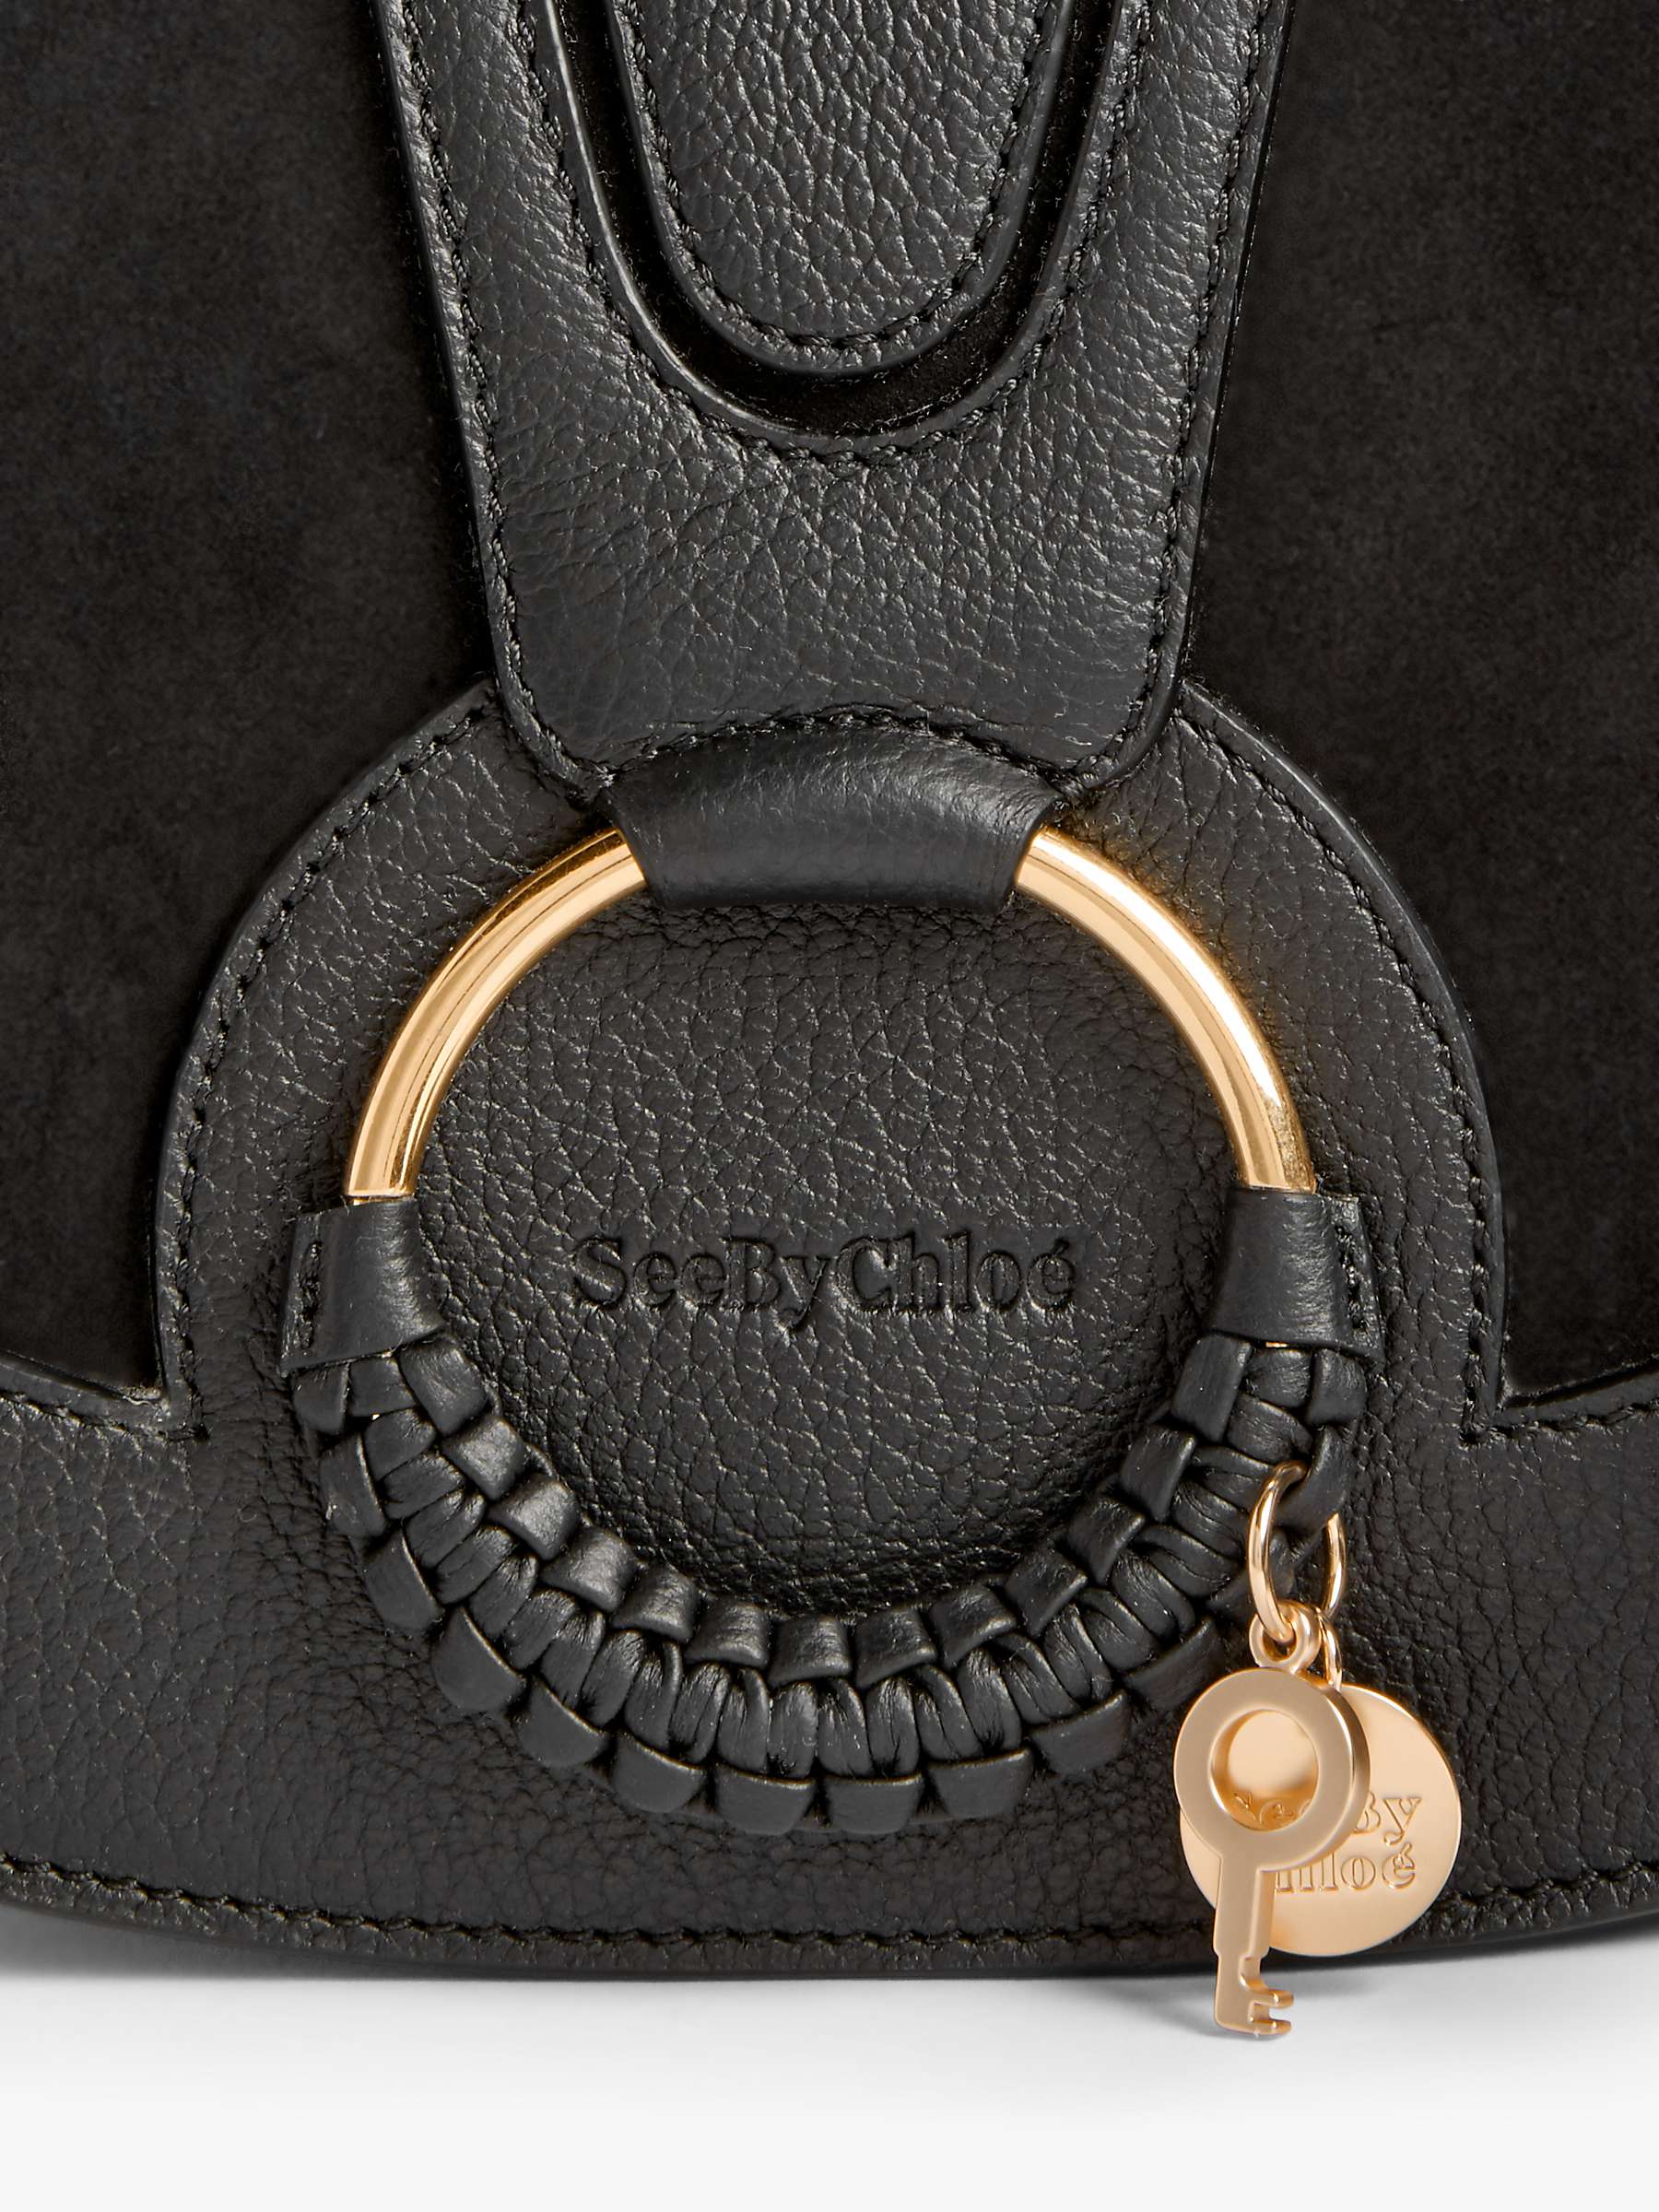 Buy See By Chloé Small Hana Suede Leather Satchel Bag Online at johnlewis.com